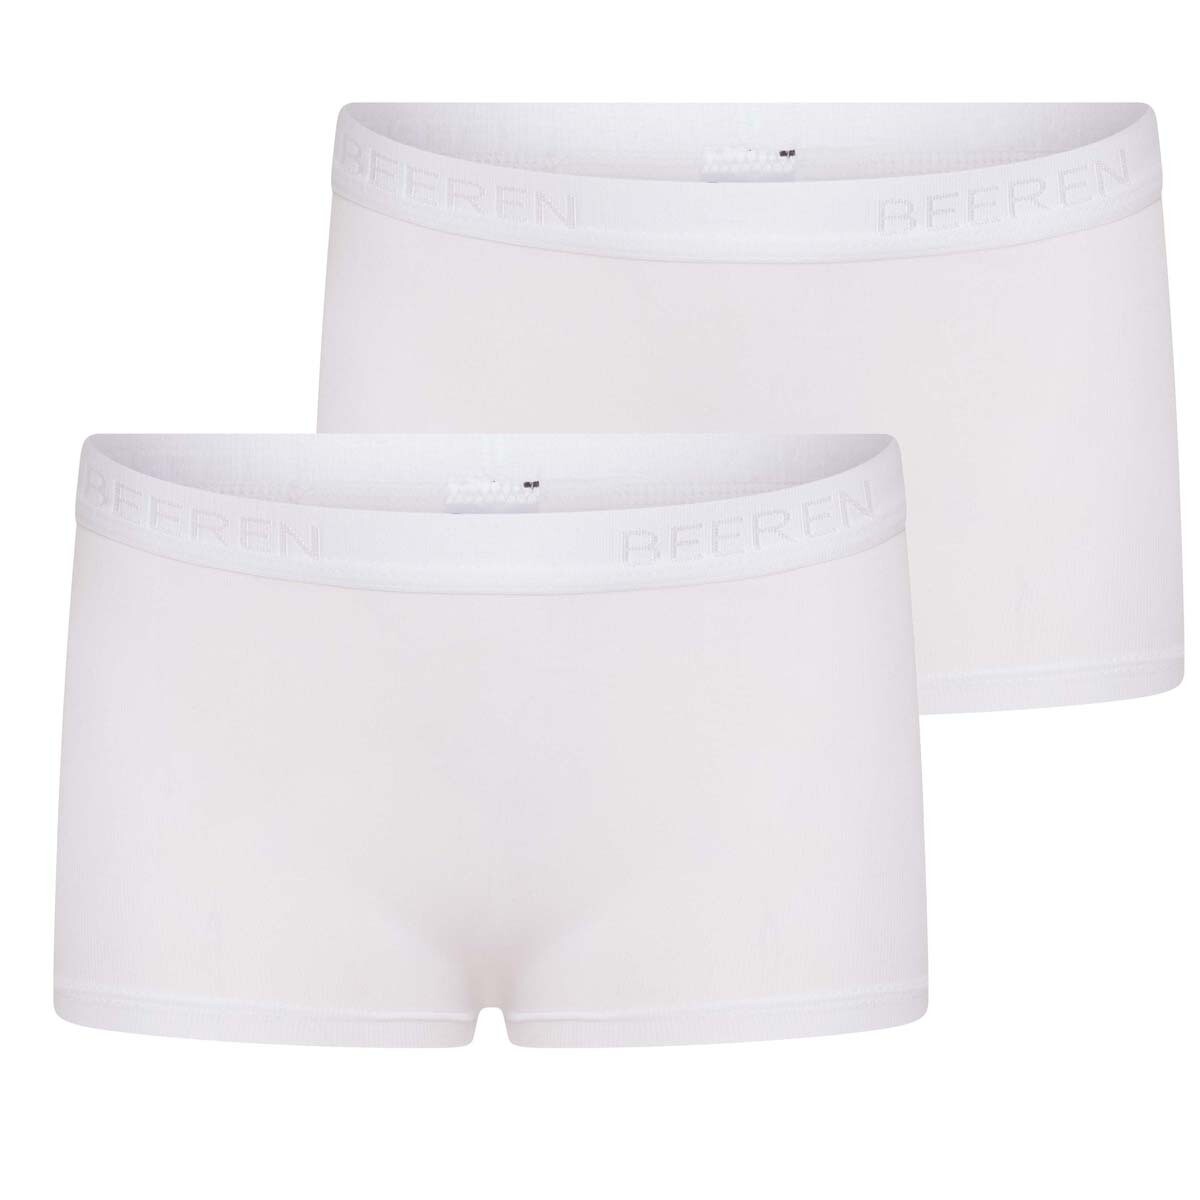 (21-453) Meisjes boxer 2-pack Young wit 128/140